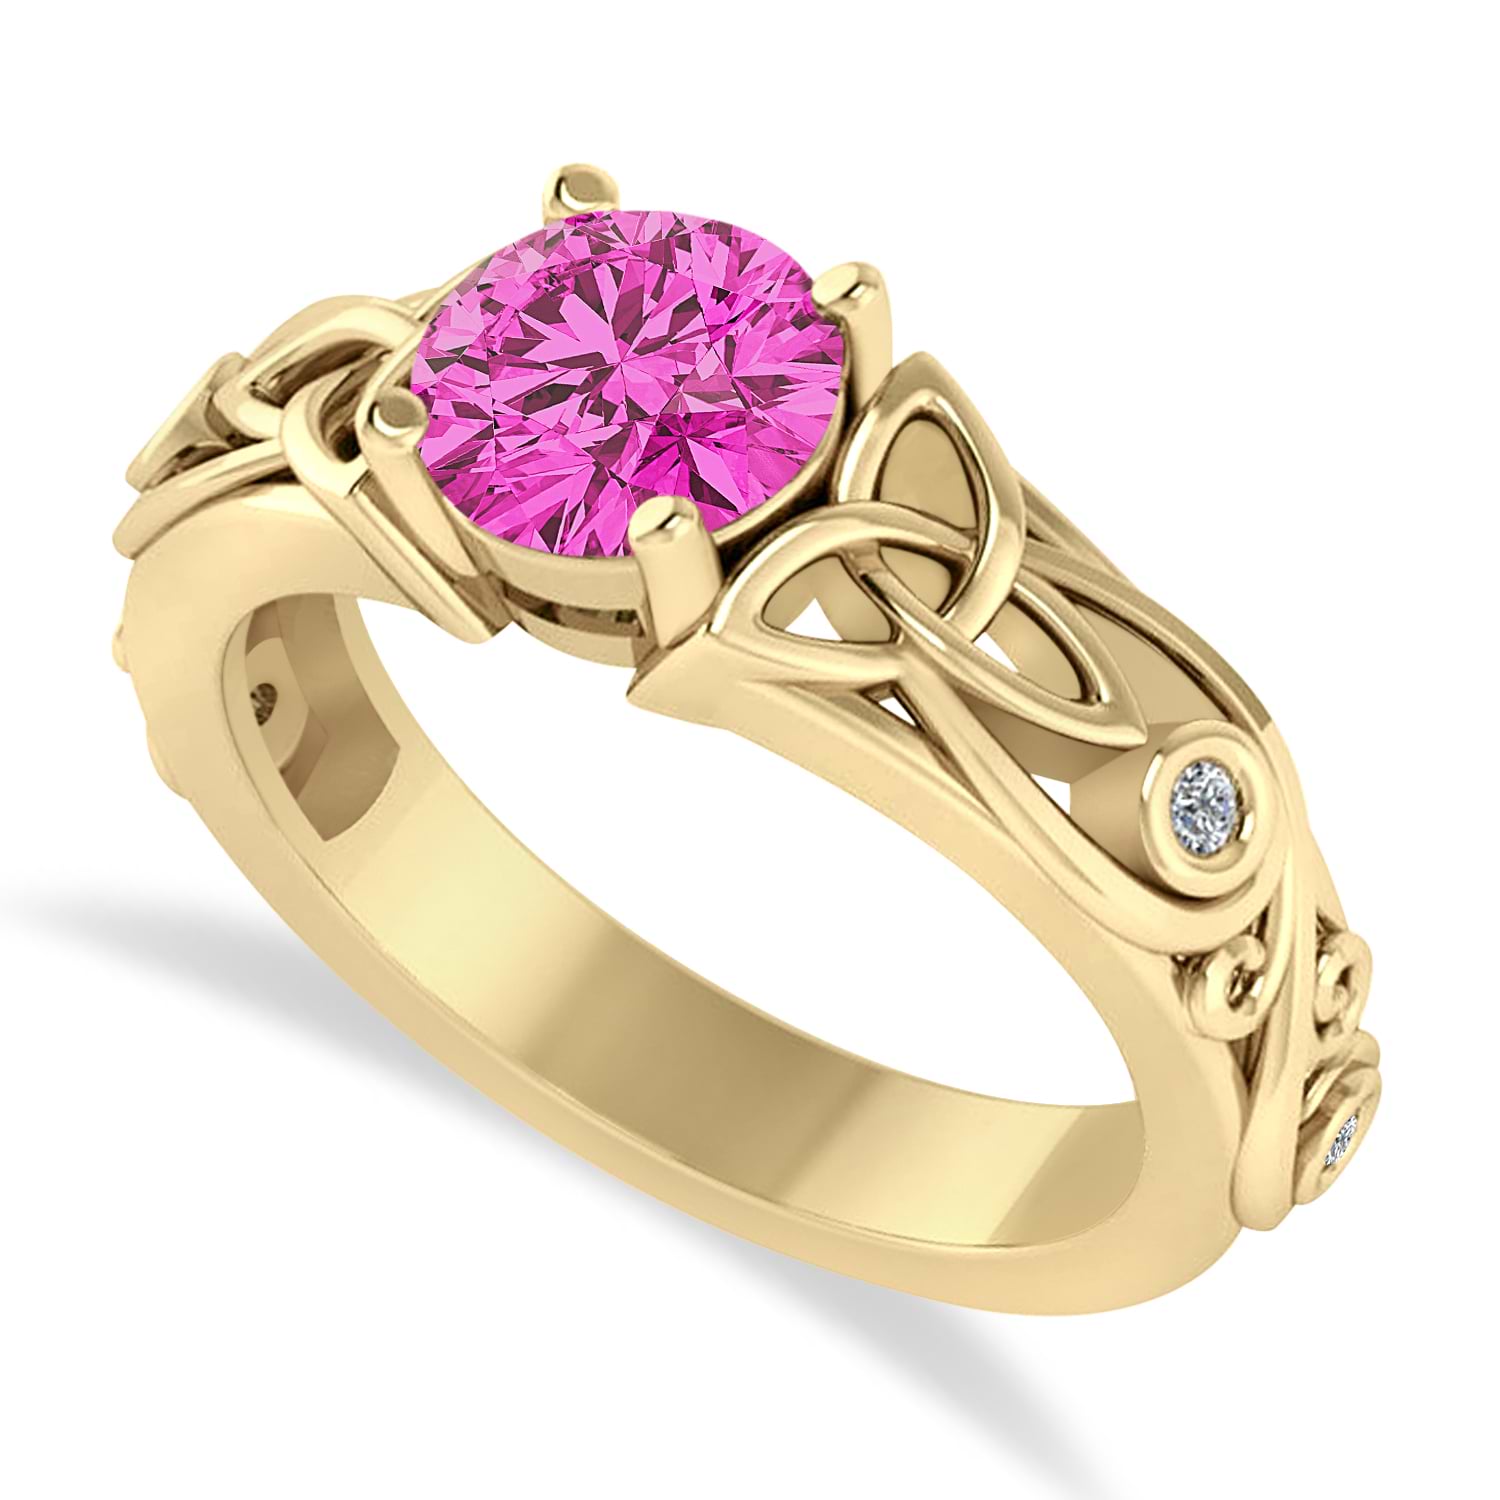 Color Merchants 10k White Gold Oval Pink Topaz And Diamond Ring RM6410W-PT  - KP Jewelers